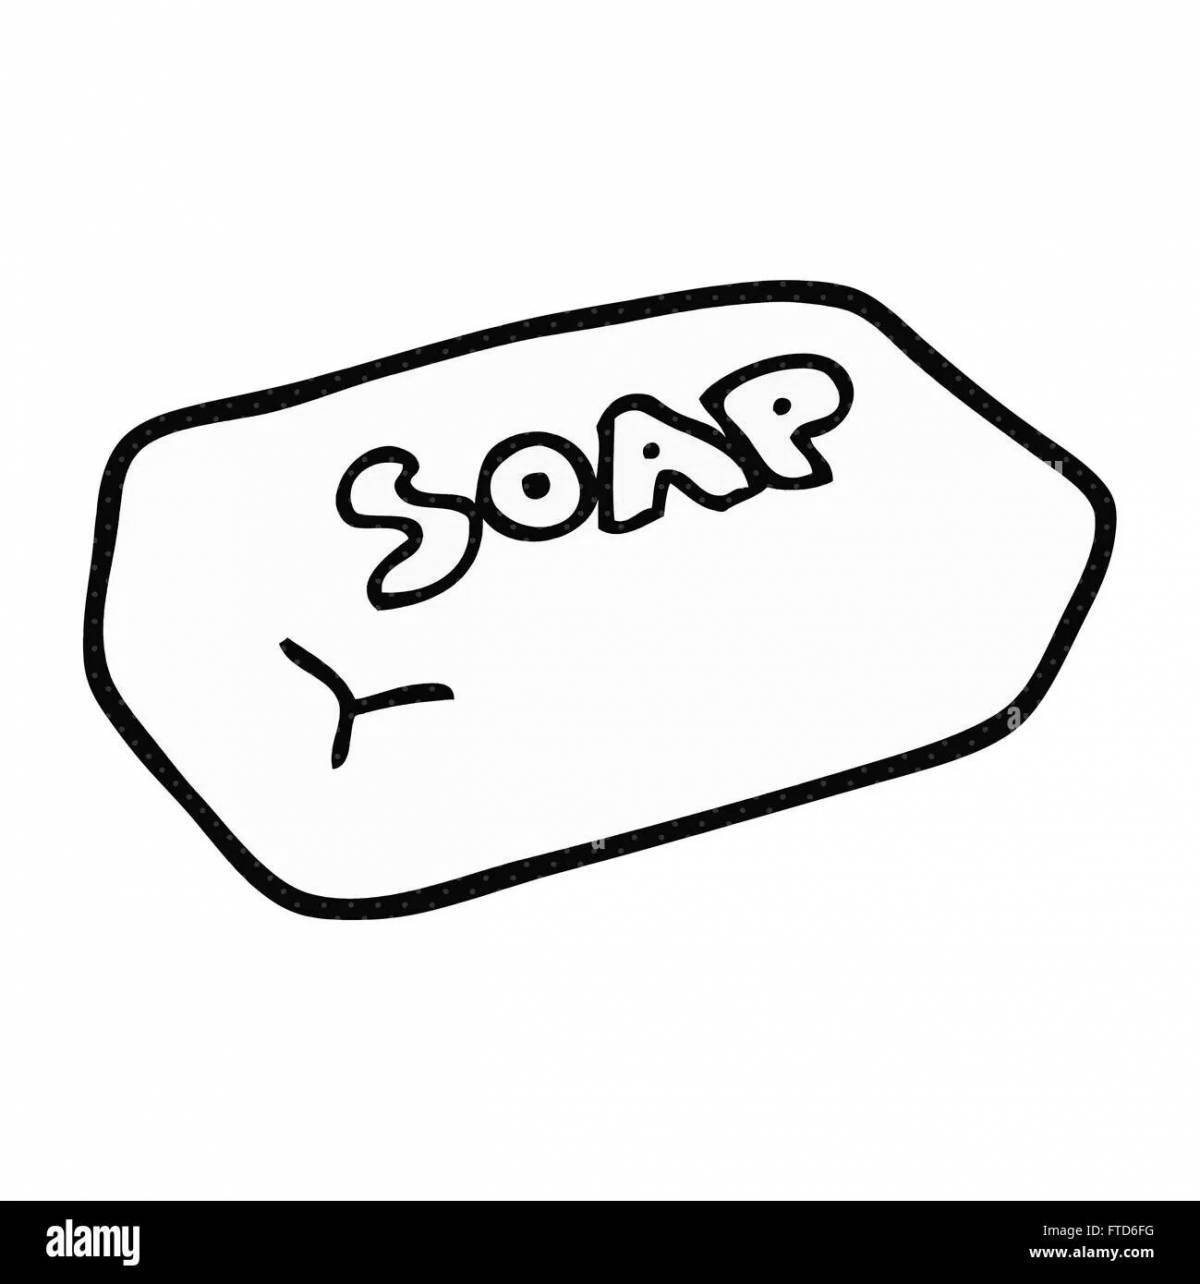 Fun soap coloring book for 3-4 year olds